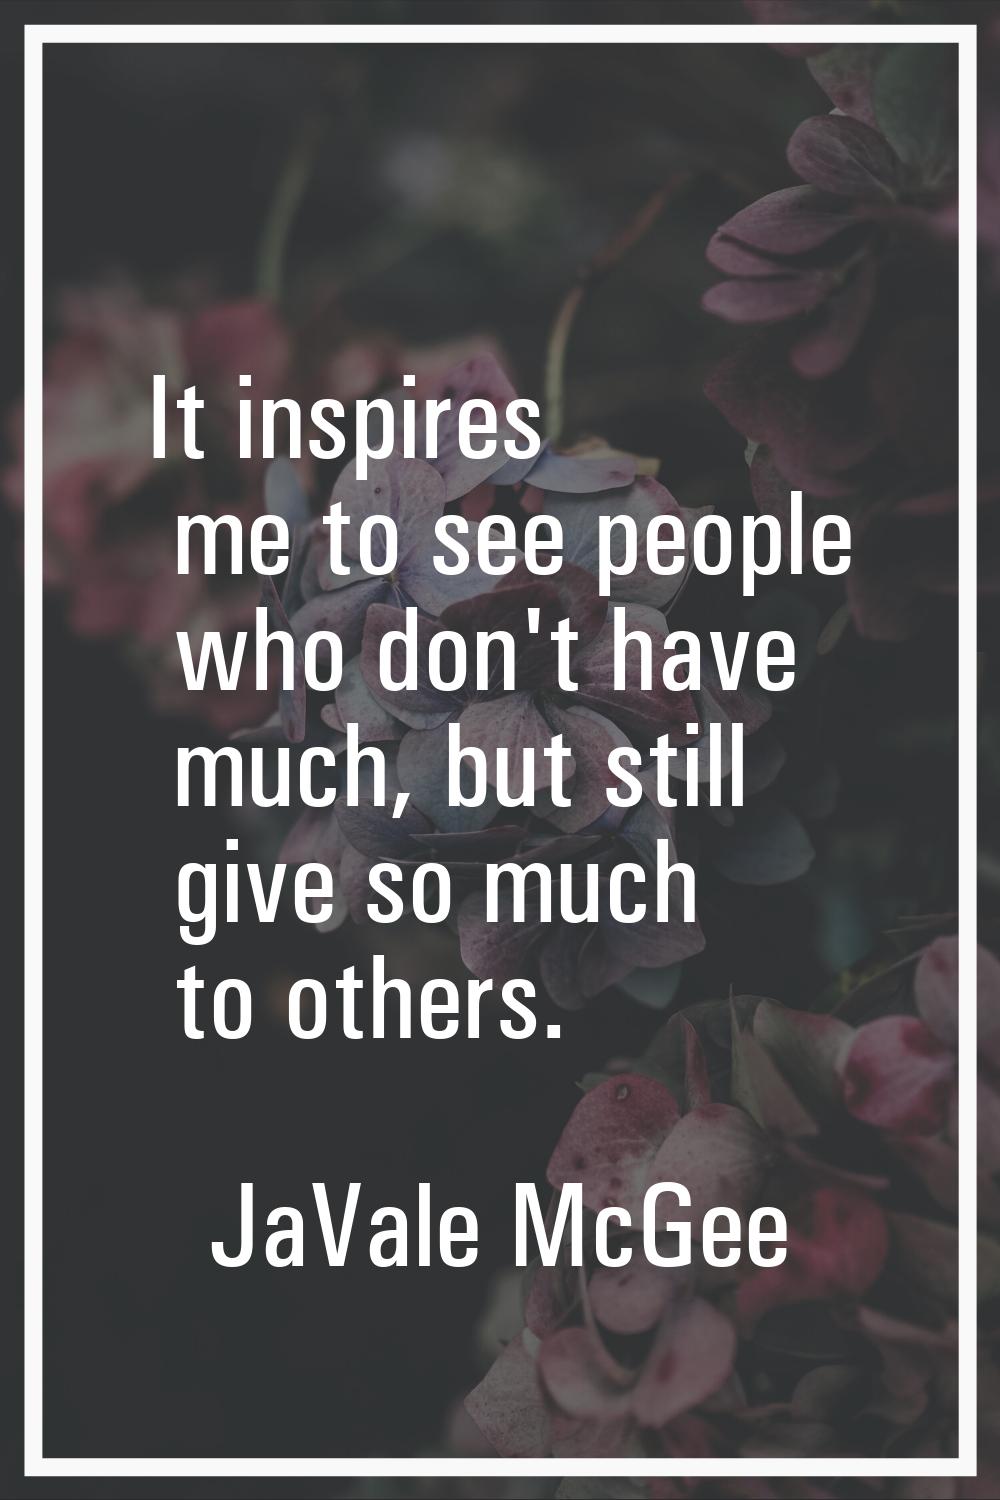 It inspires me to see people who don't have much, but still give so much to others.